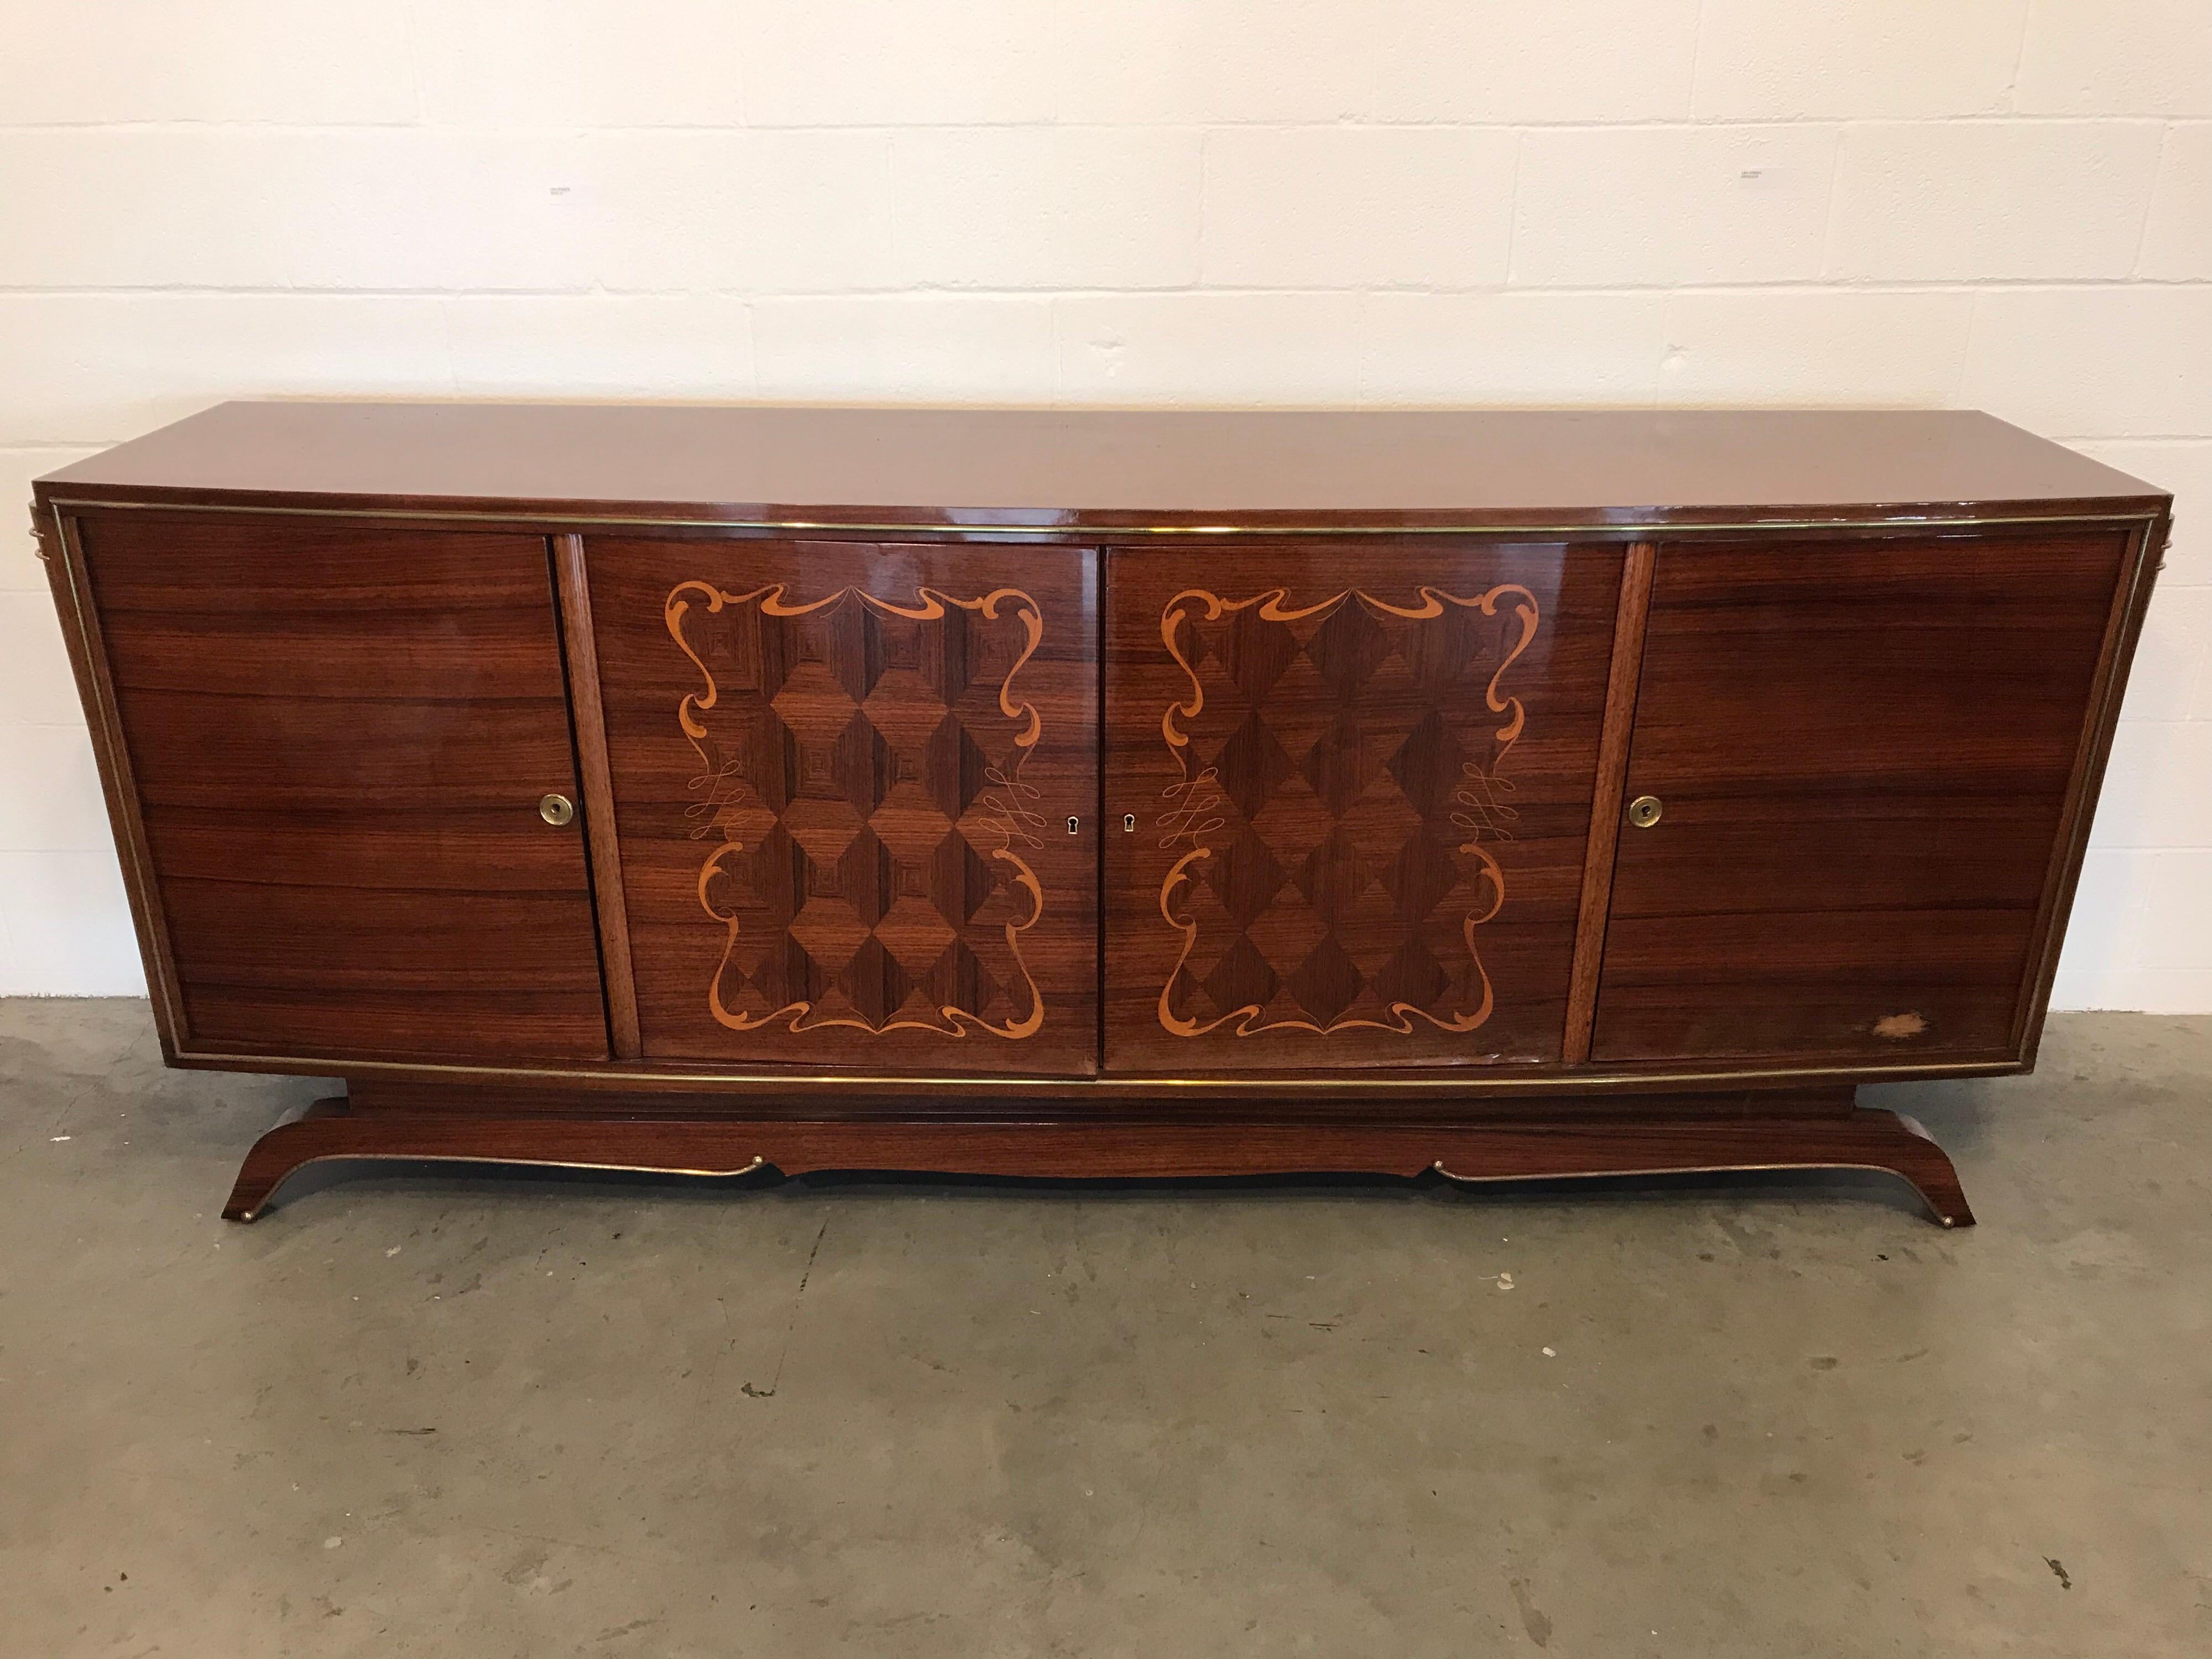 Buffet with bronze detailing and intricate wood marquetry.